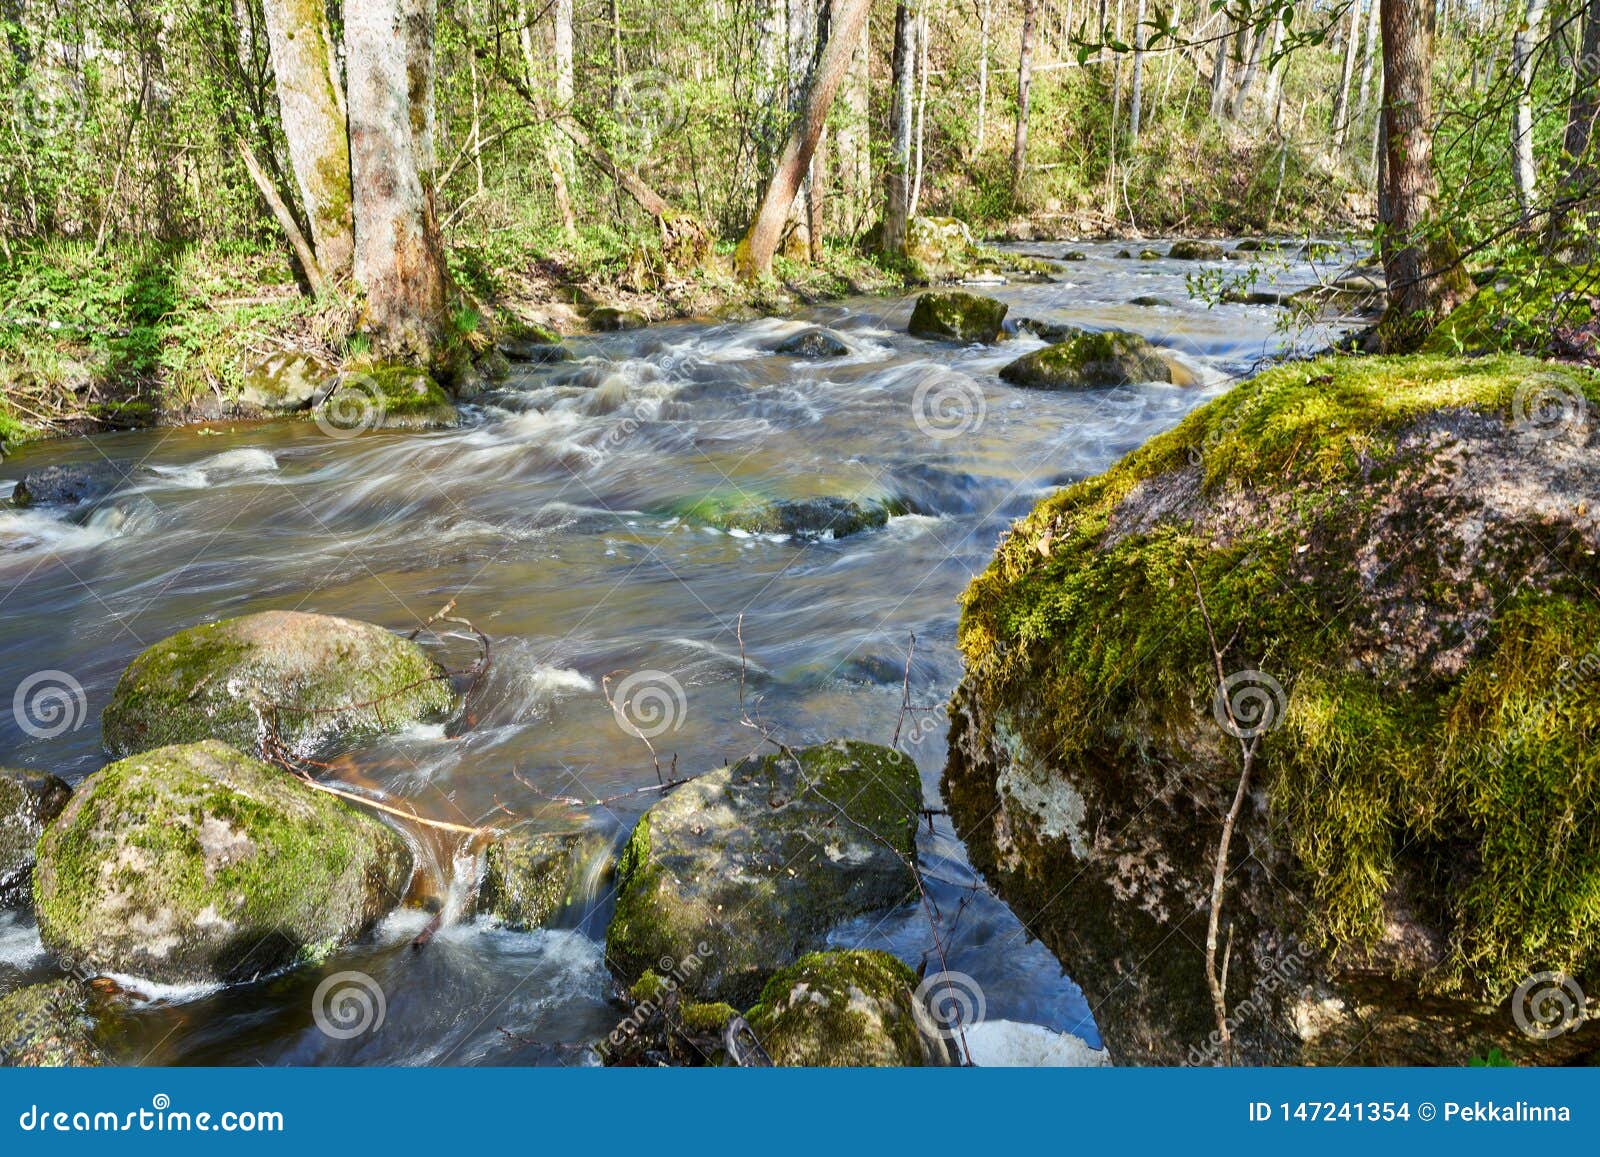 Peaceful Moody River Scene On Forest In Spring Time Stock Photo Image Of Rocks Flowing